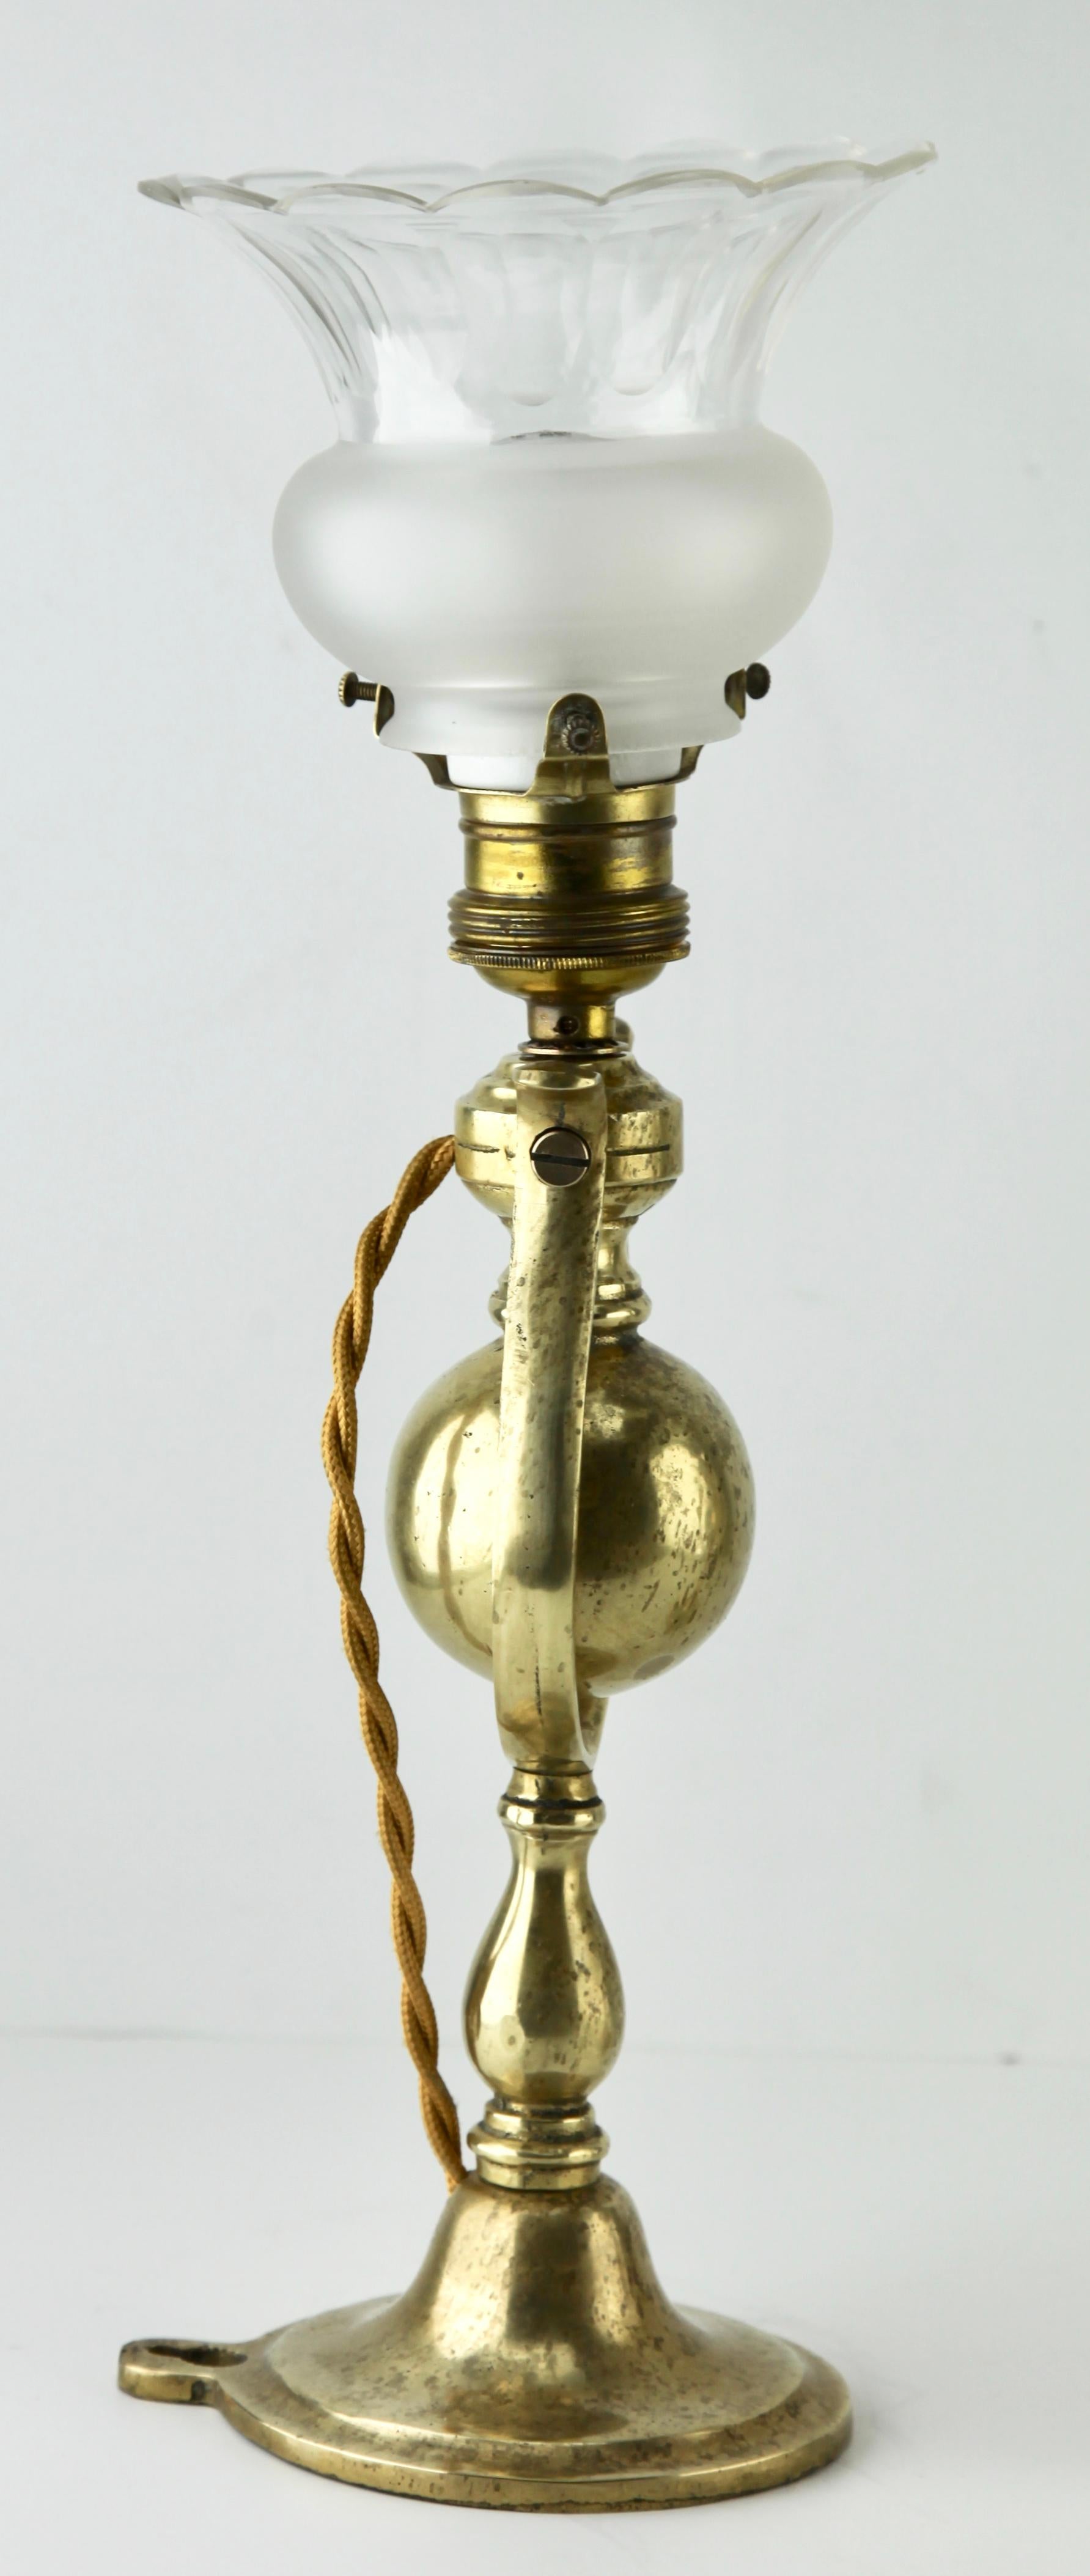 Dutch Period Brass Ship's Wall Lamp with Weighted Gimble and Milk-Glass Lampshade